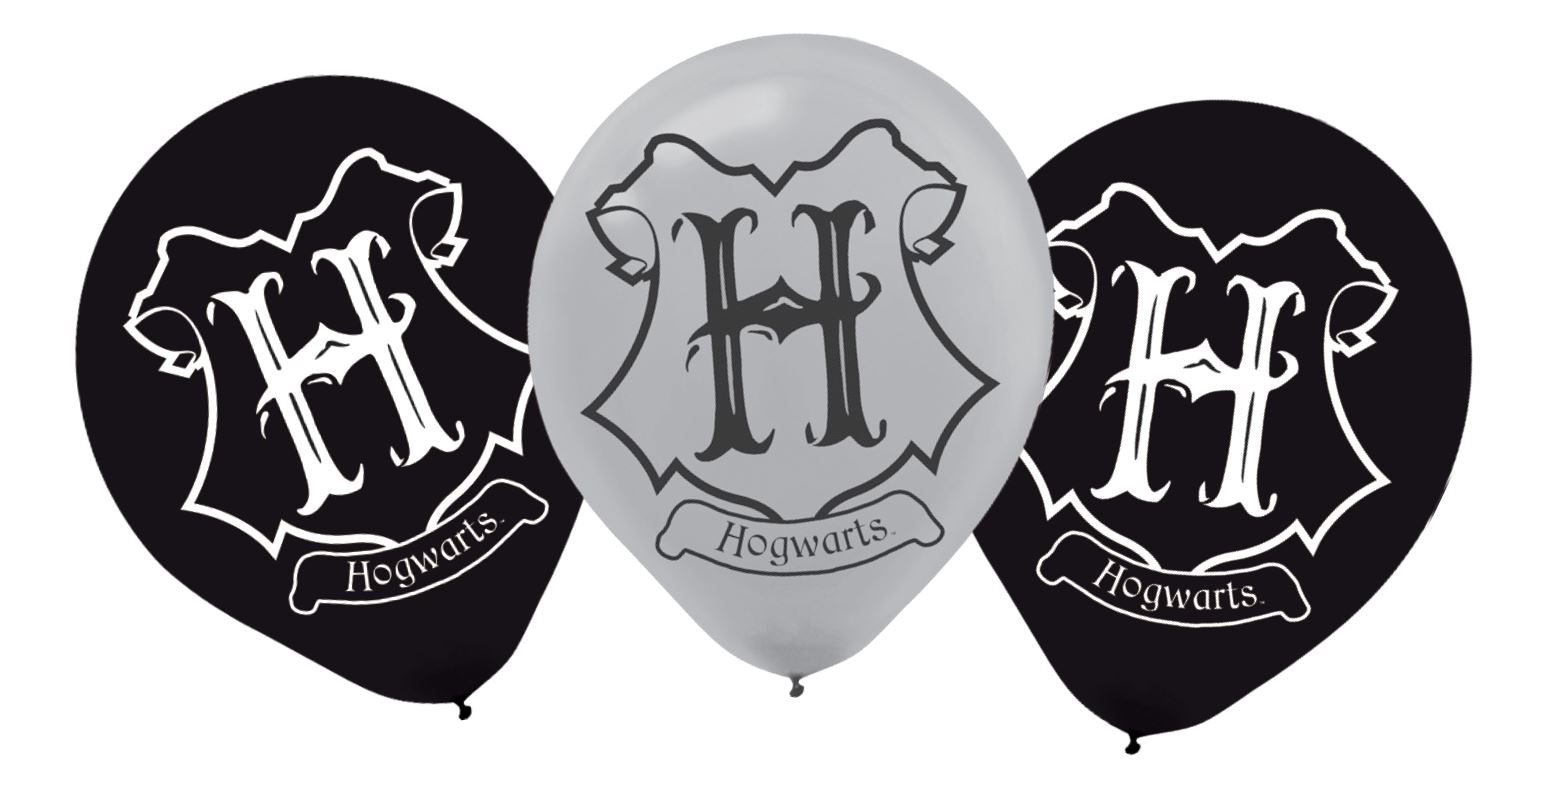 Harry Potter party supplies - 6 pack of latex balloons 